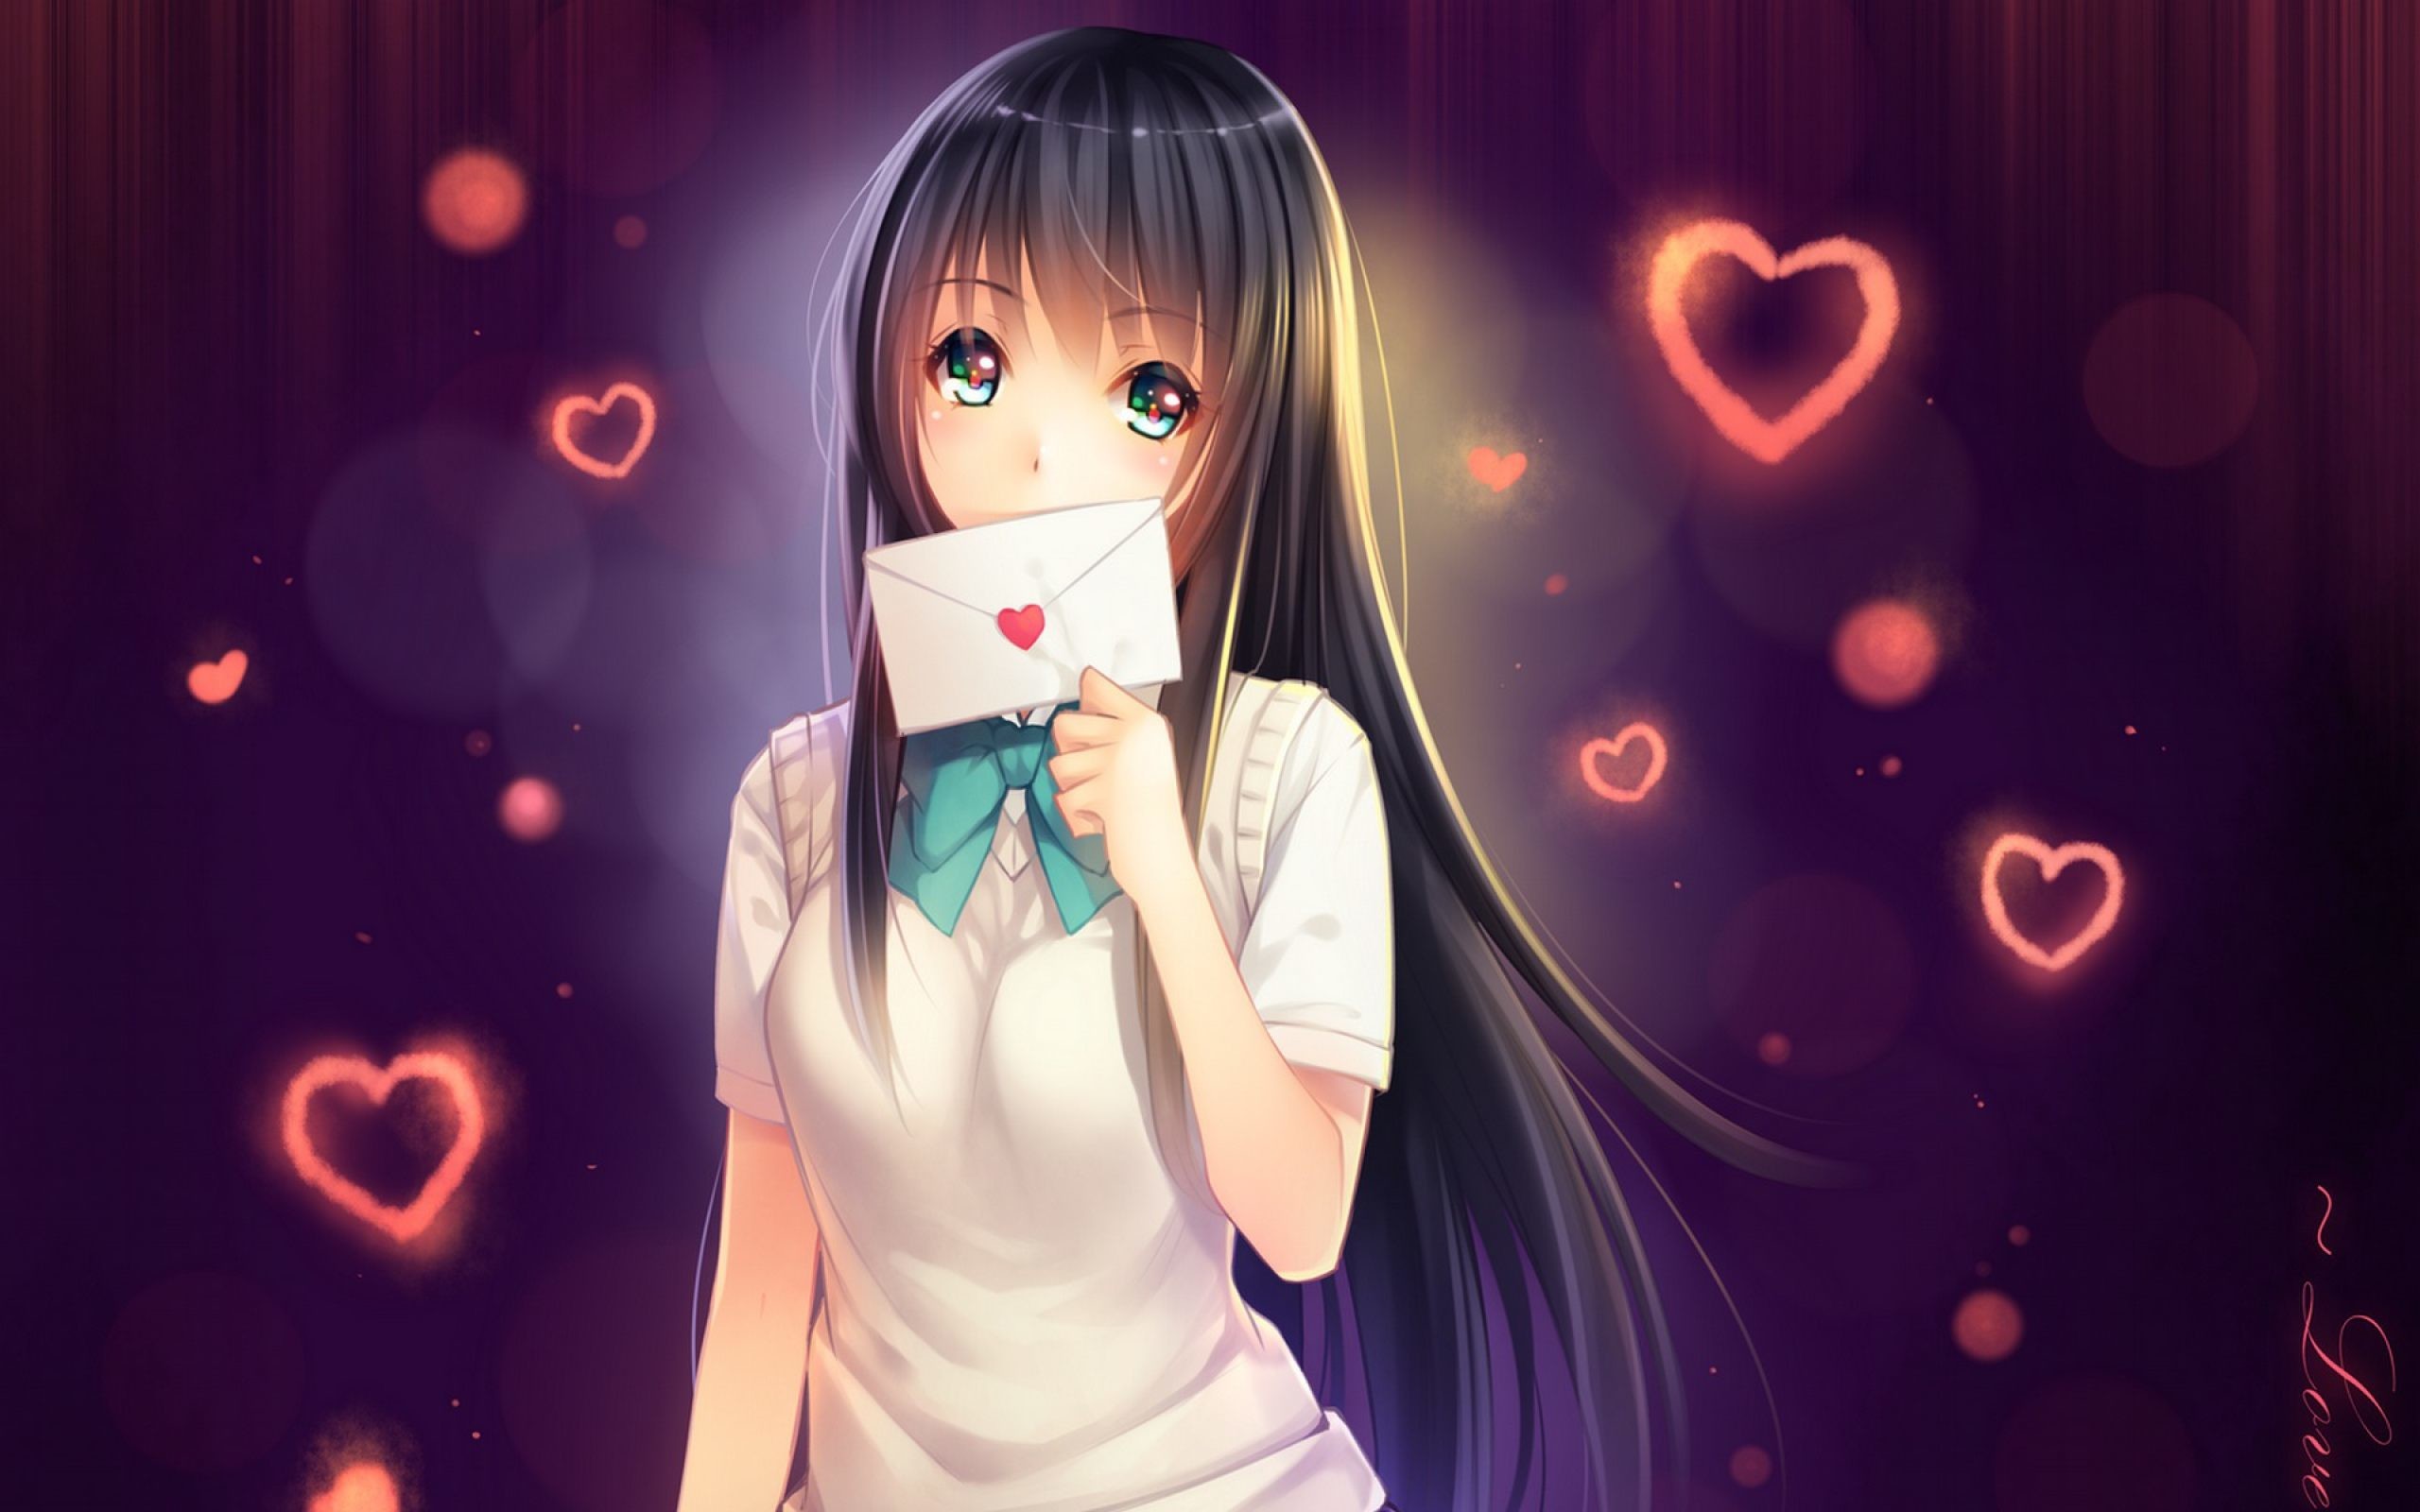 Wallpaper Anime Love 68 Pictures